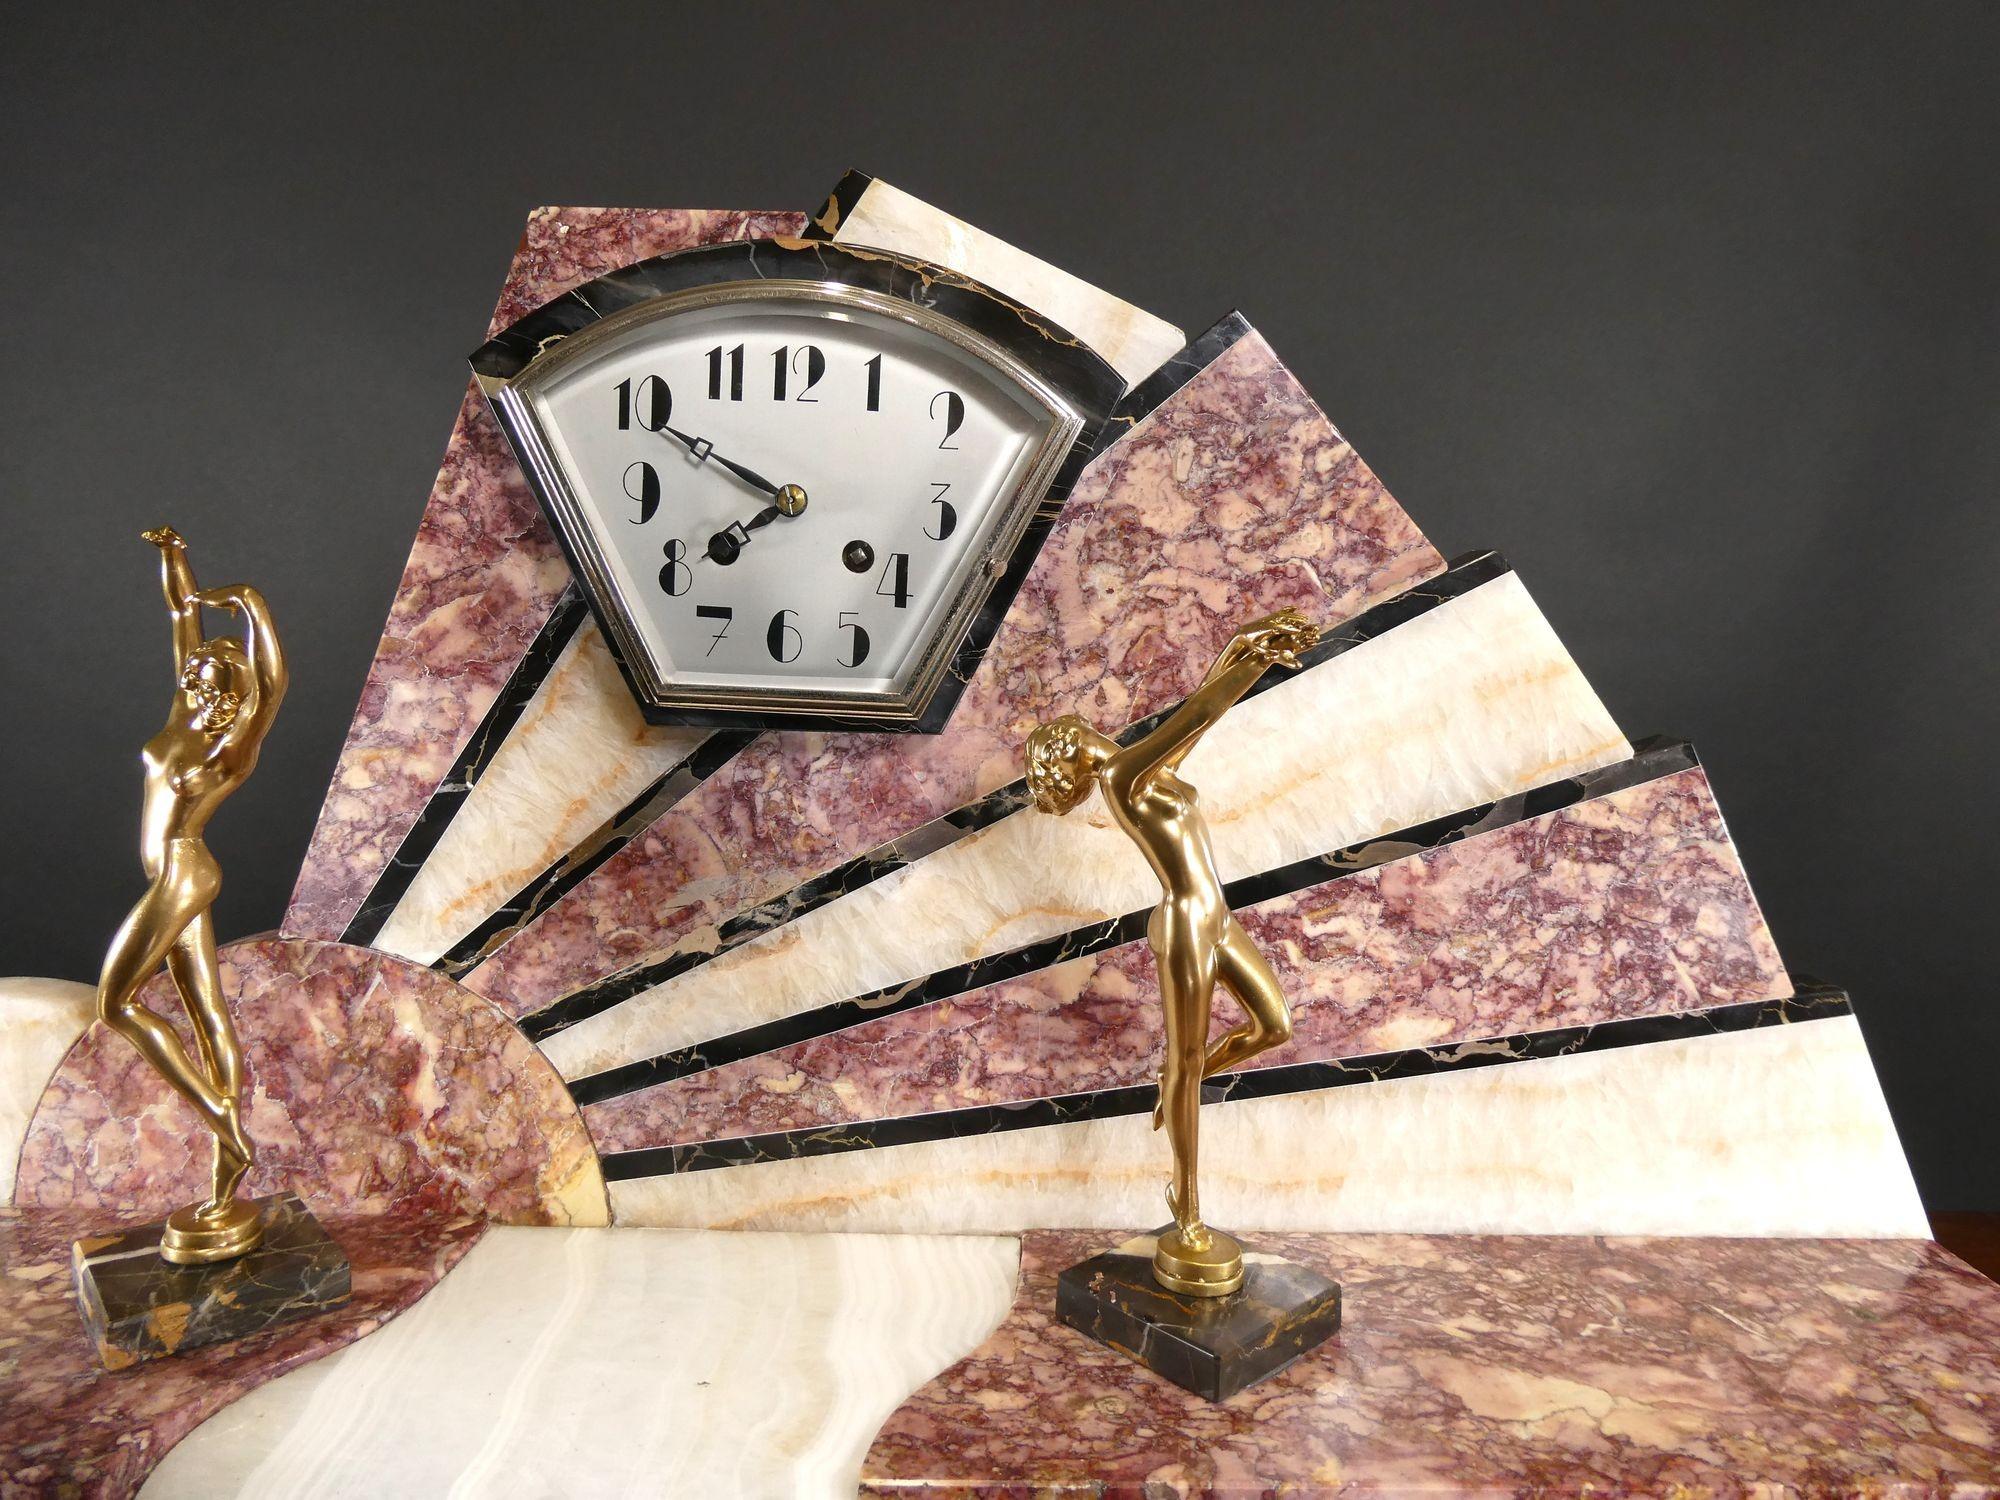 Fine Art Deco Marble Mantel Clock

Art Deco mantel clock housed in a fan shaped case with finely figured Rouge, Cream and Black marble inserts, standing on a stepped black marble plinth. The dial supported either side by two gilded dancers standing